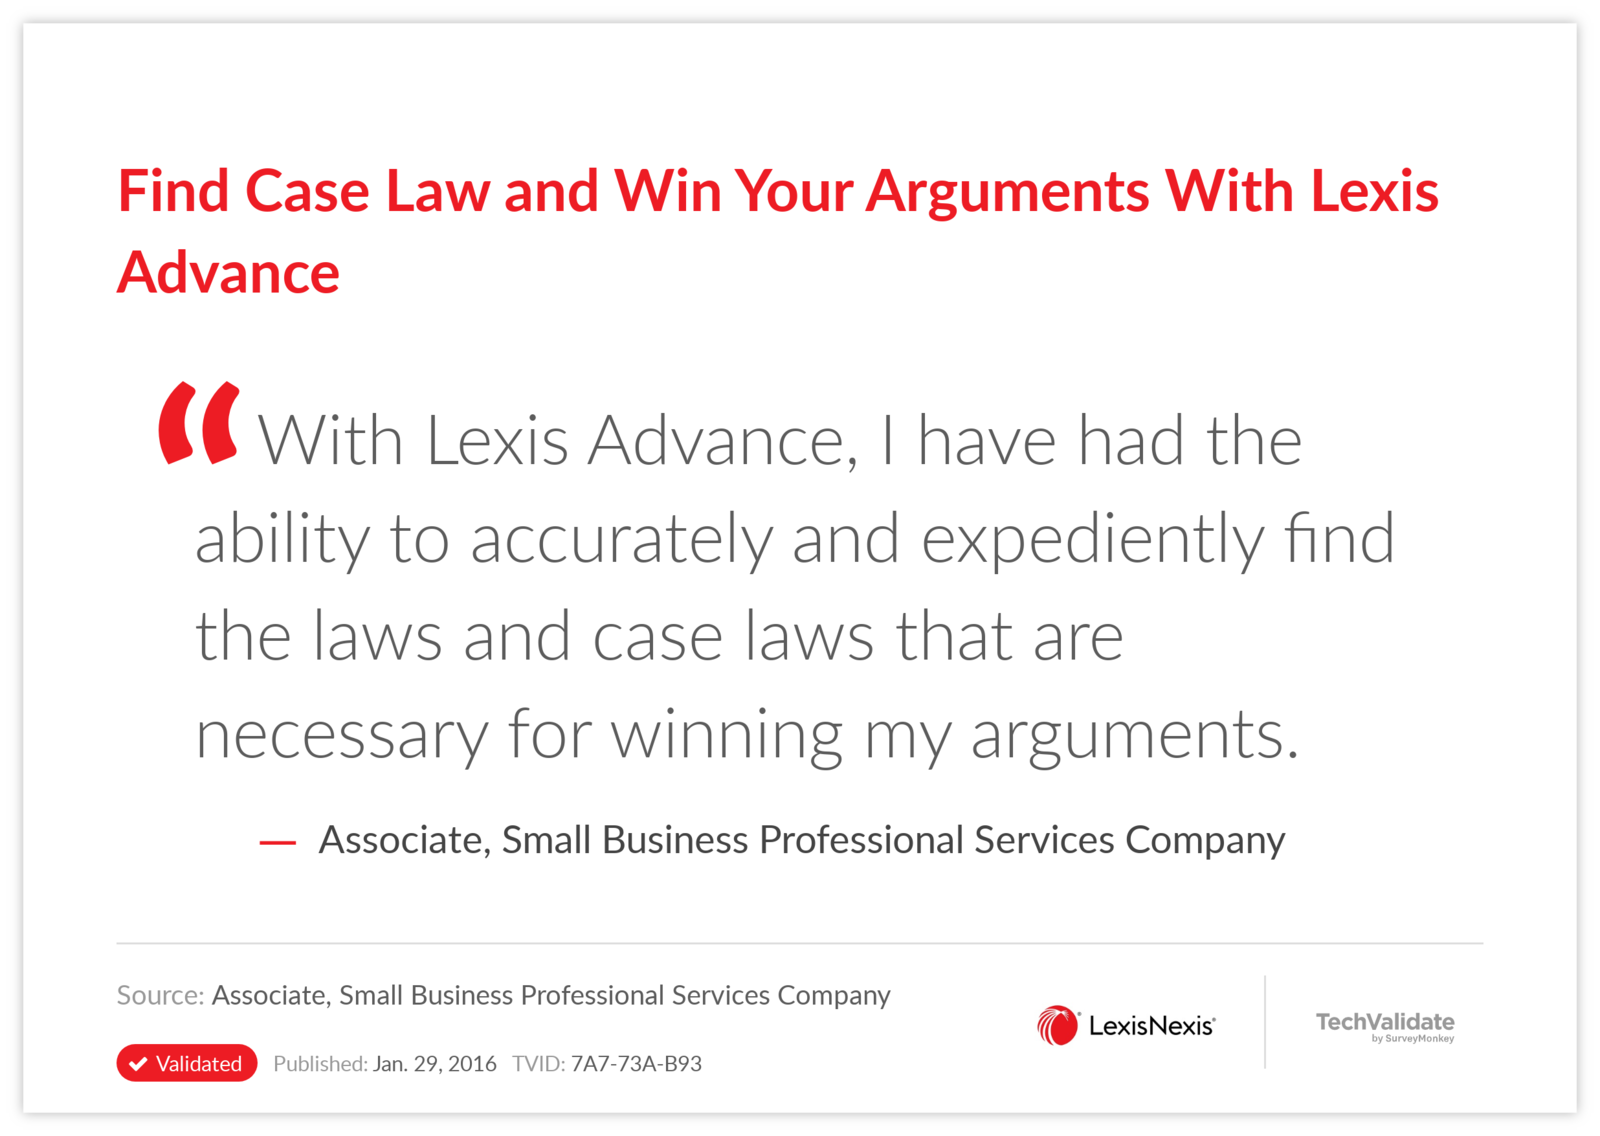 Find Case Law and Win Your Arguments With Lexis Advance